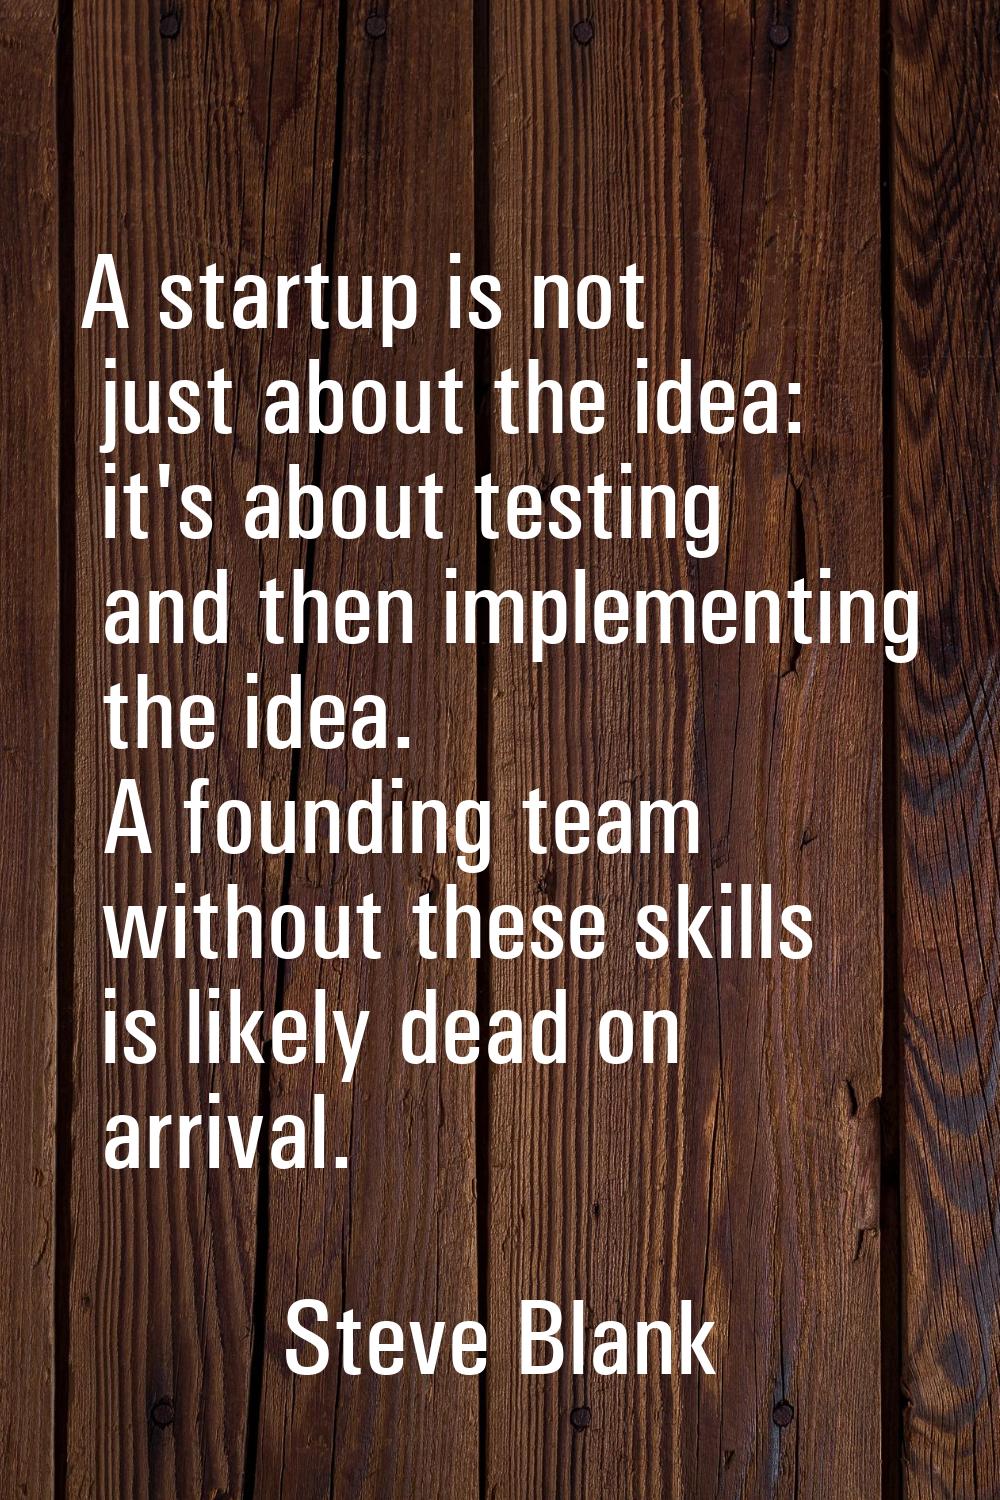 A startup is not just about the idea: it's about testing and then implementing the idea. A founding